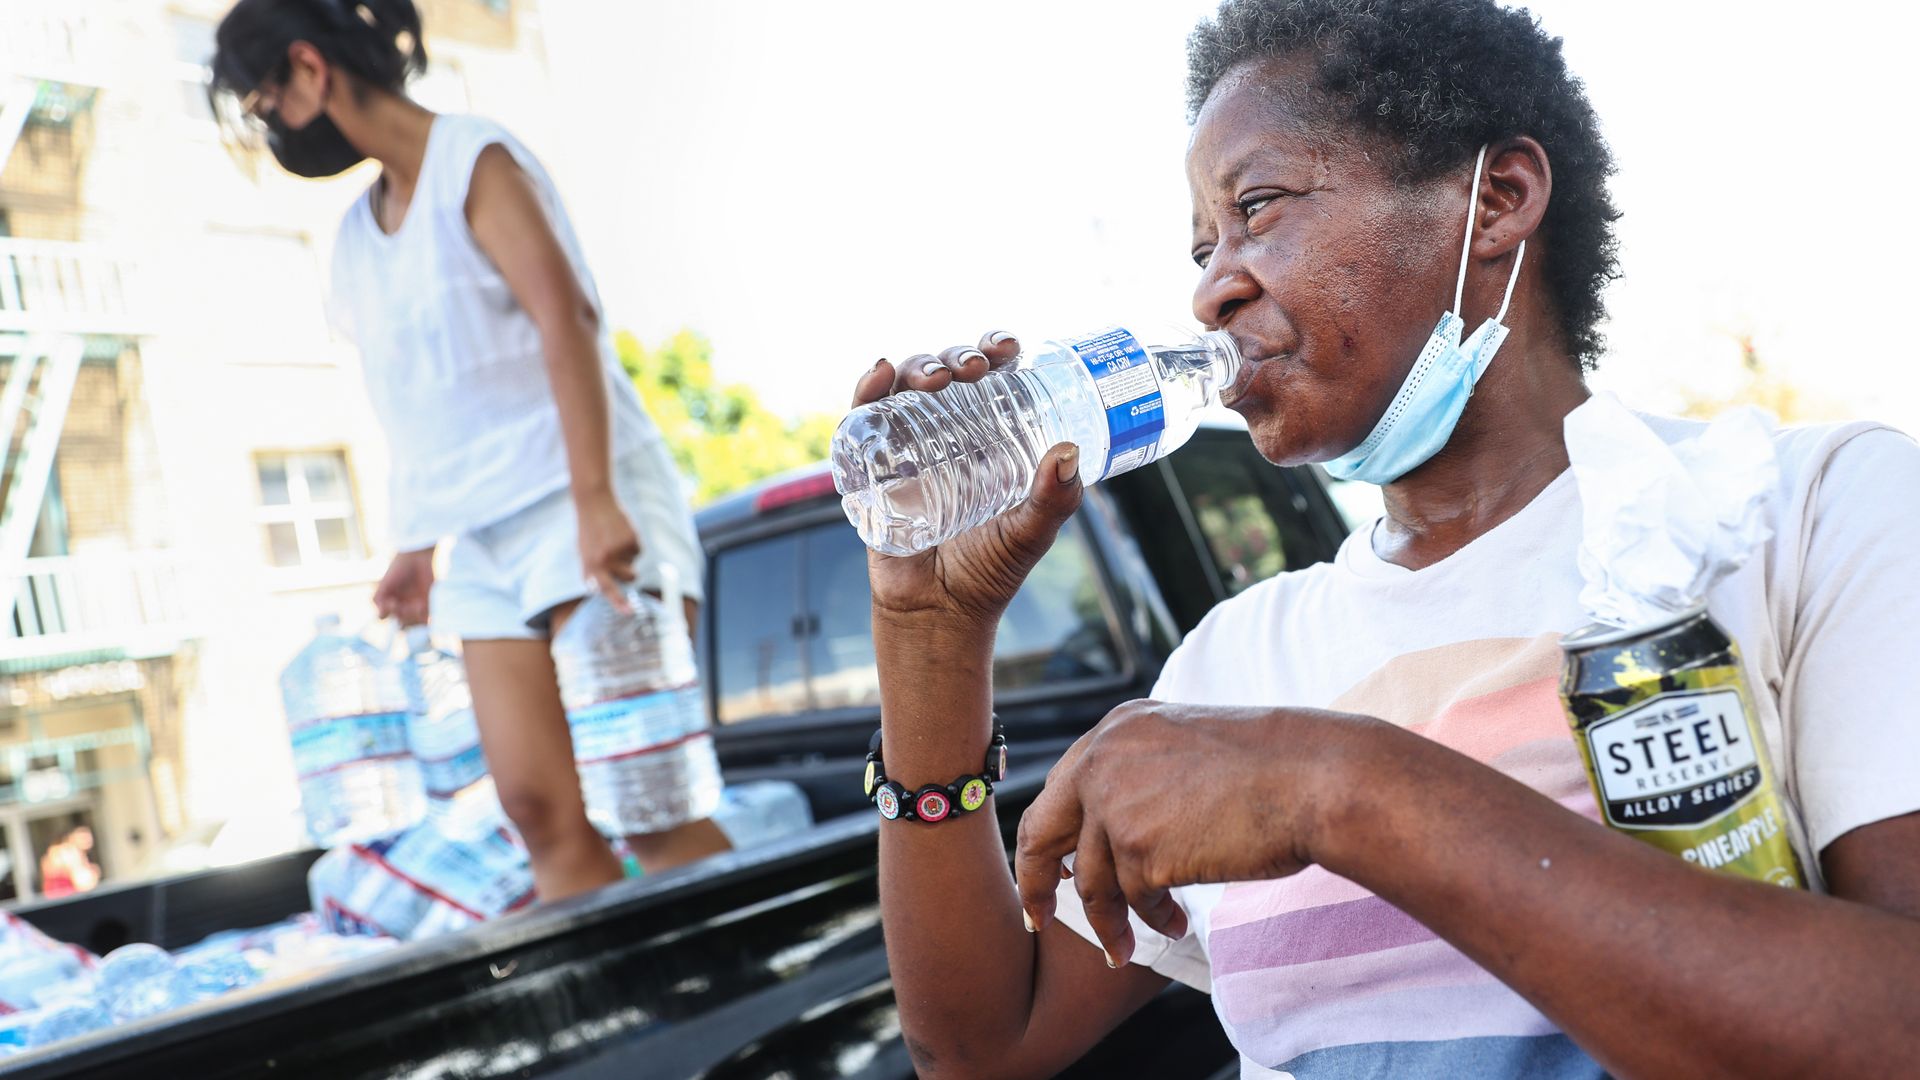 : A member of the Skid Row community drinks water distributed by volunteers with Water Drop LA on September 4.